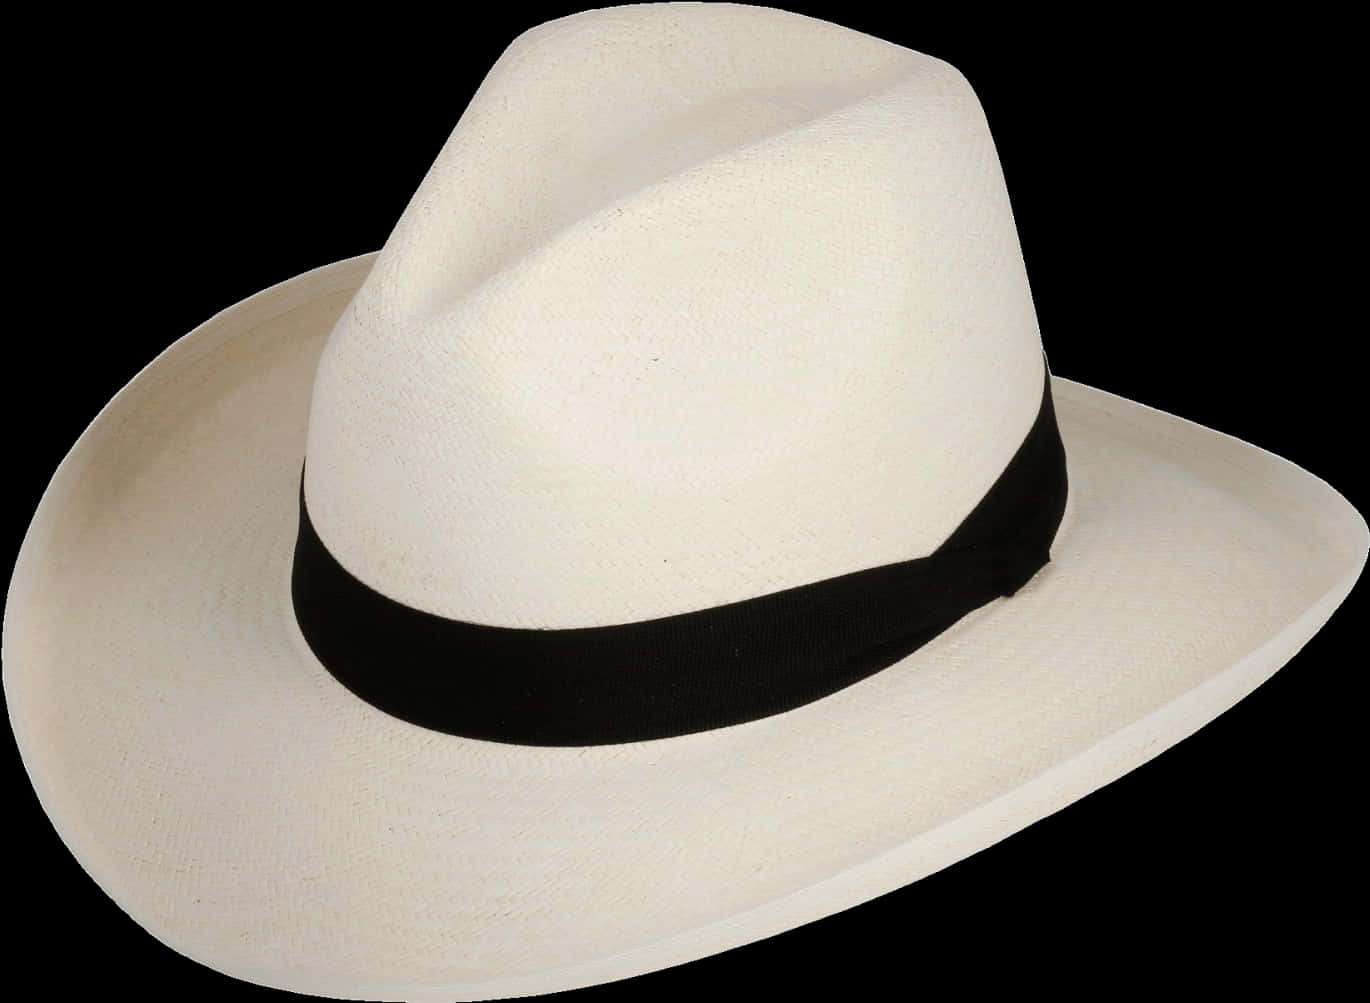 A White Hat With A Black Band